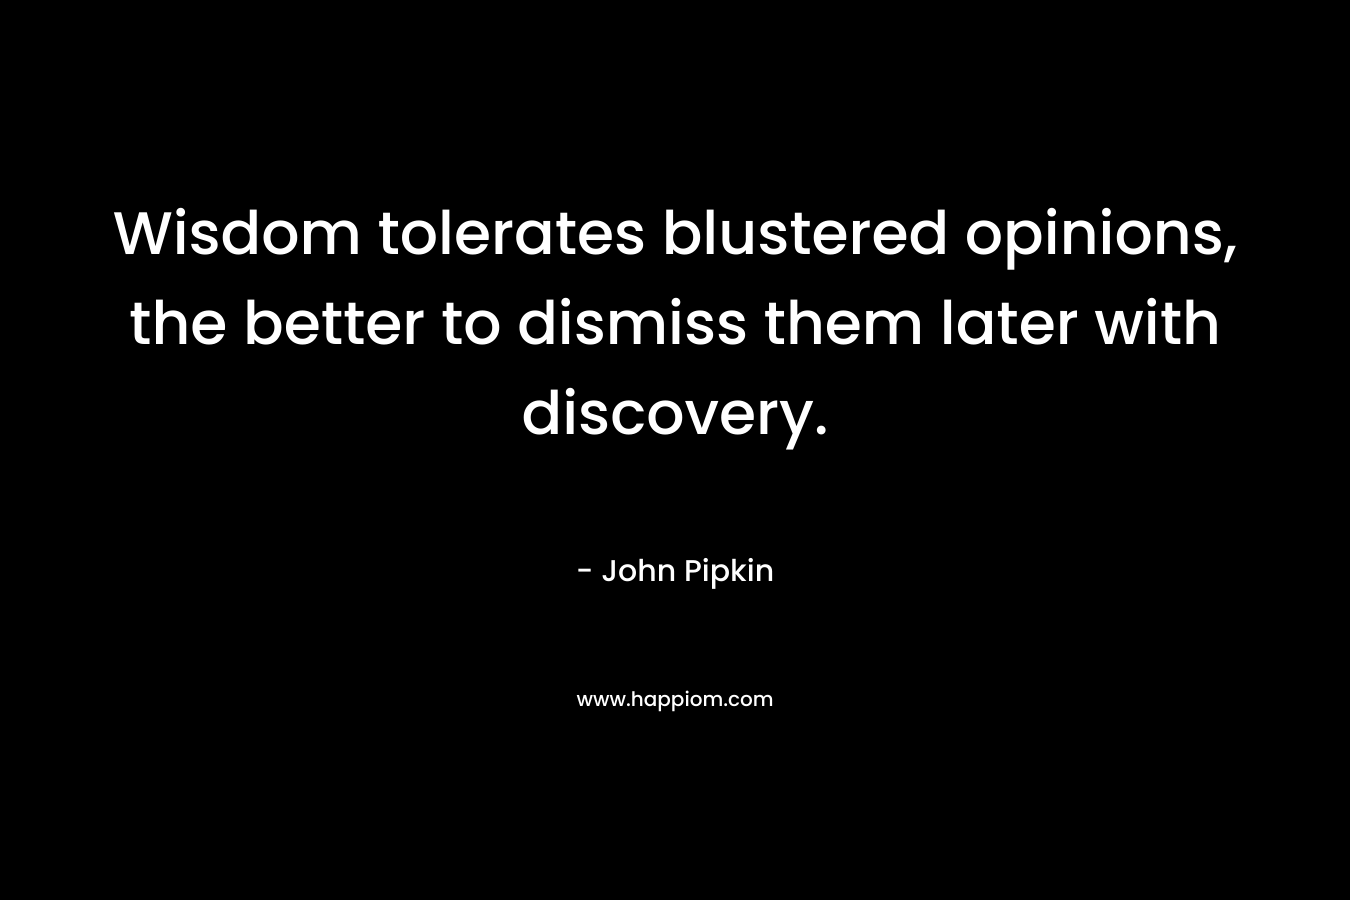 Wisdom tolerates blustered opinions, the better to dismiss them later with discovery. – John Pipkin